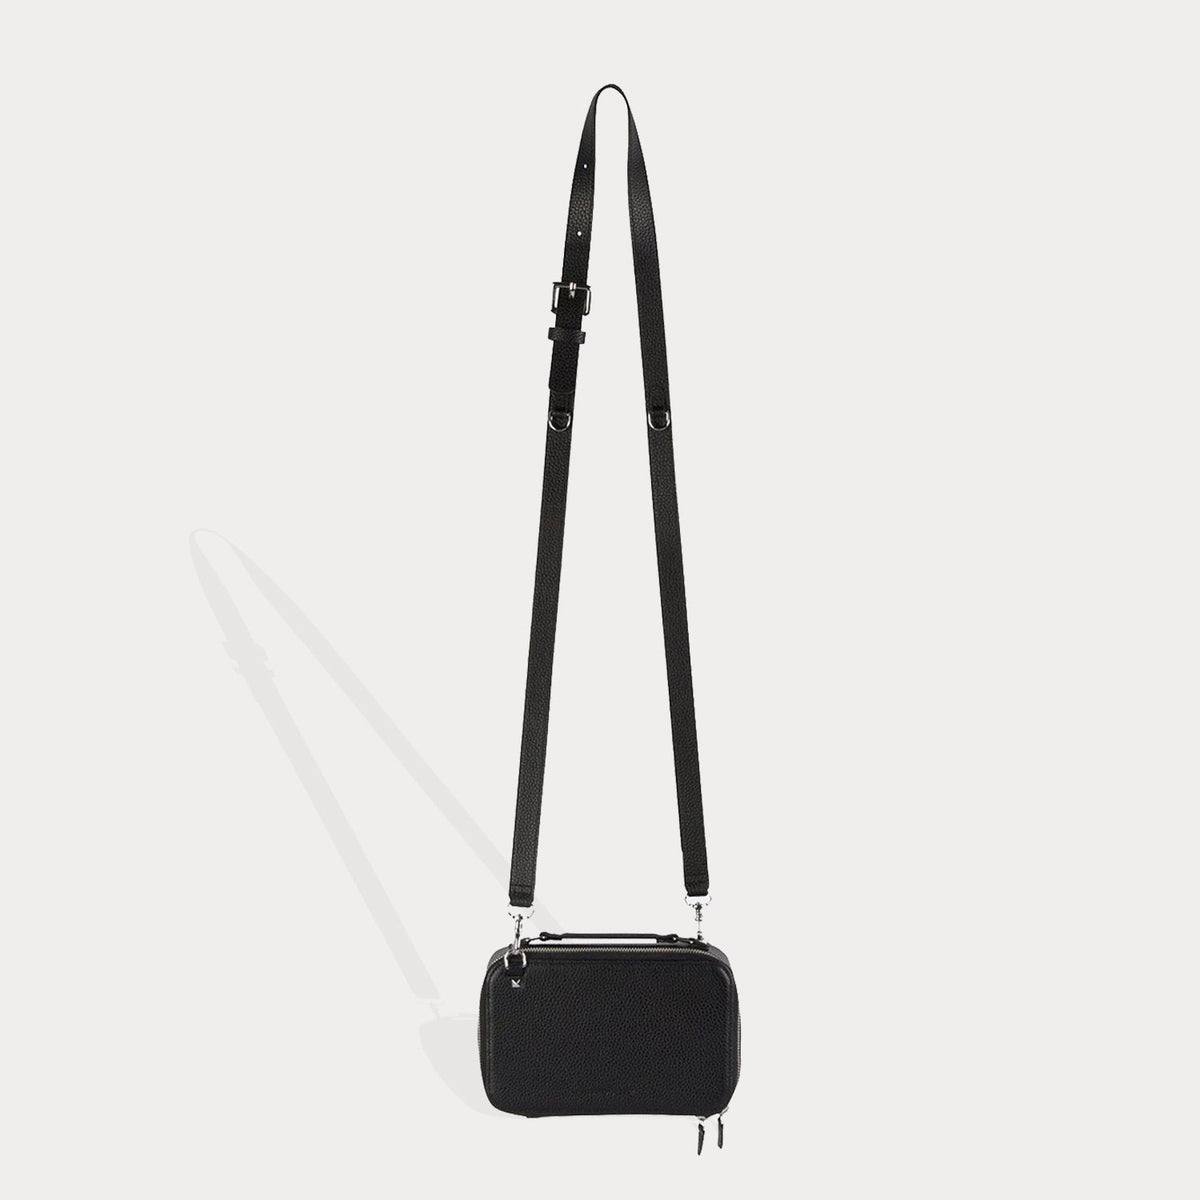 Do you guys think the D-ring will hold up?? Attached: Prada bag